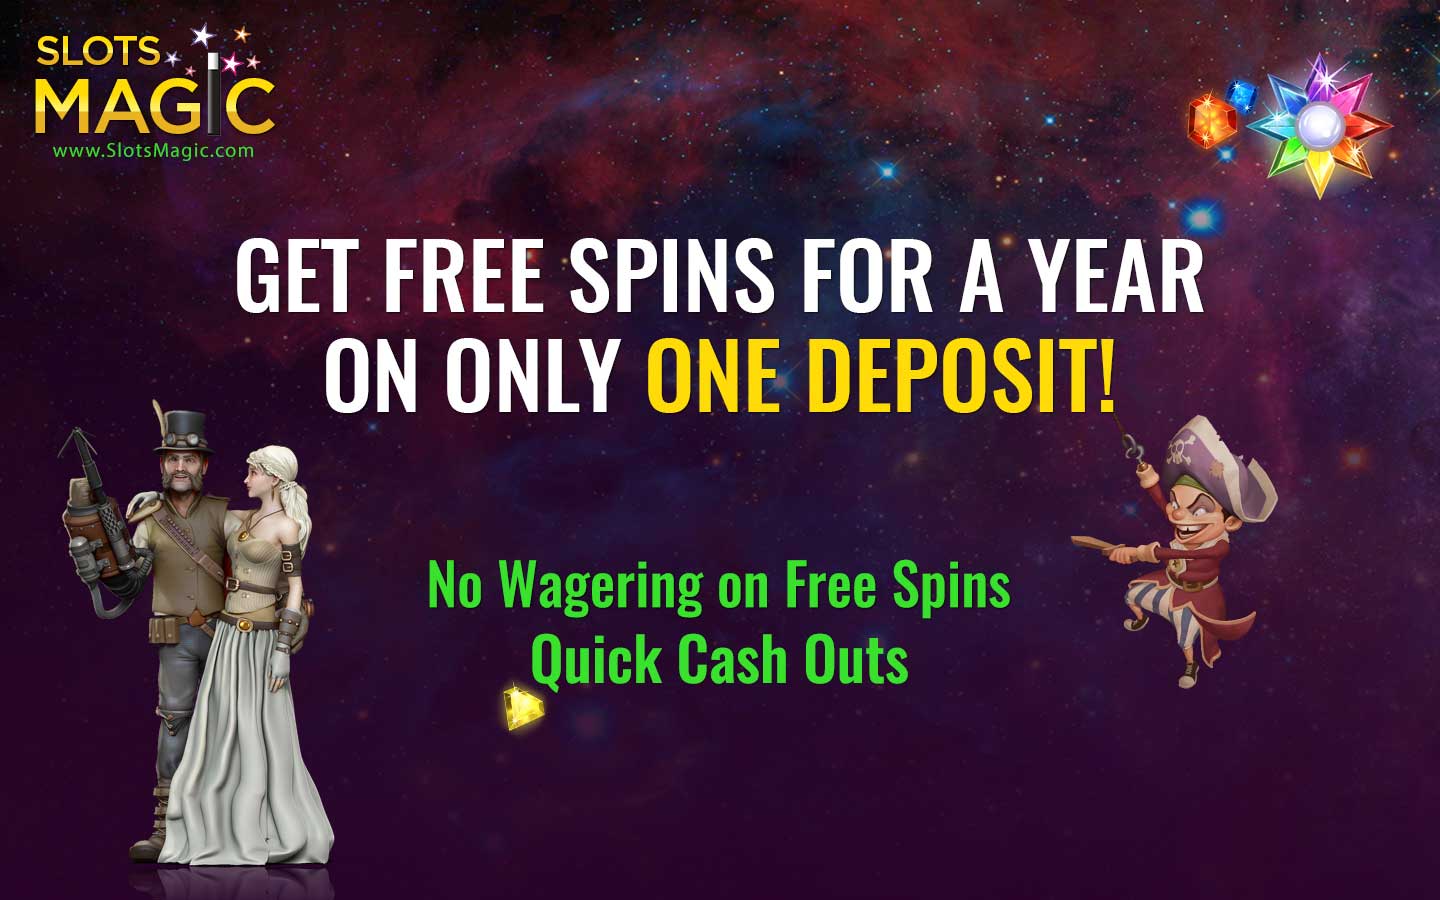 SlotsMagic free spins for a year offer